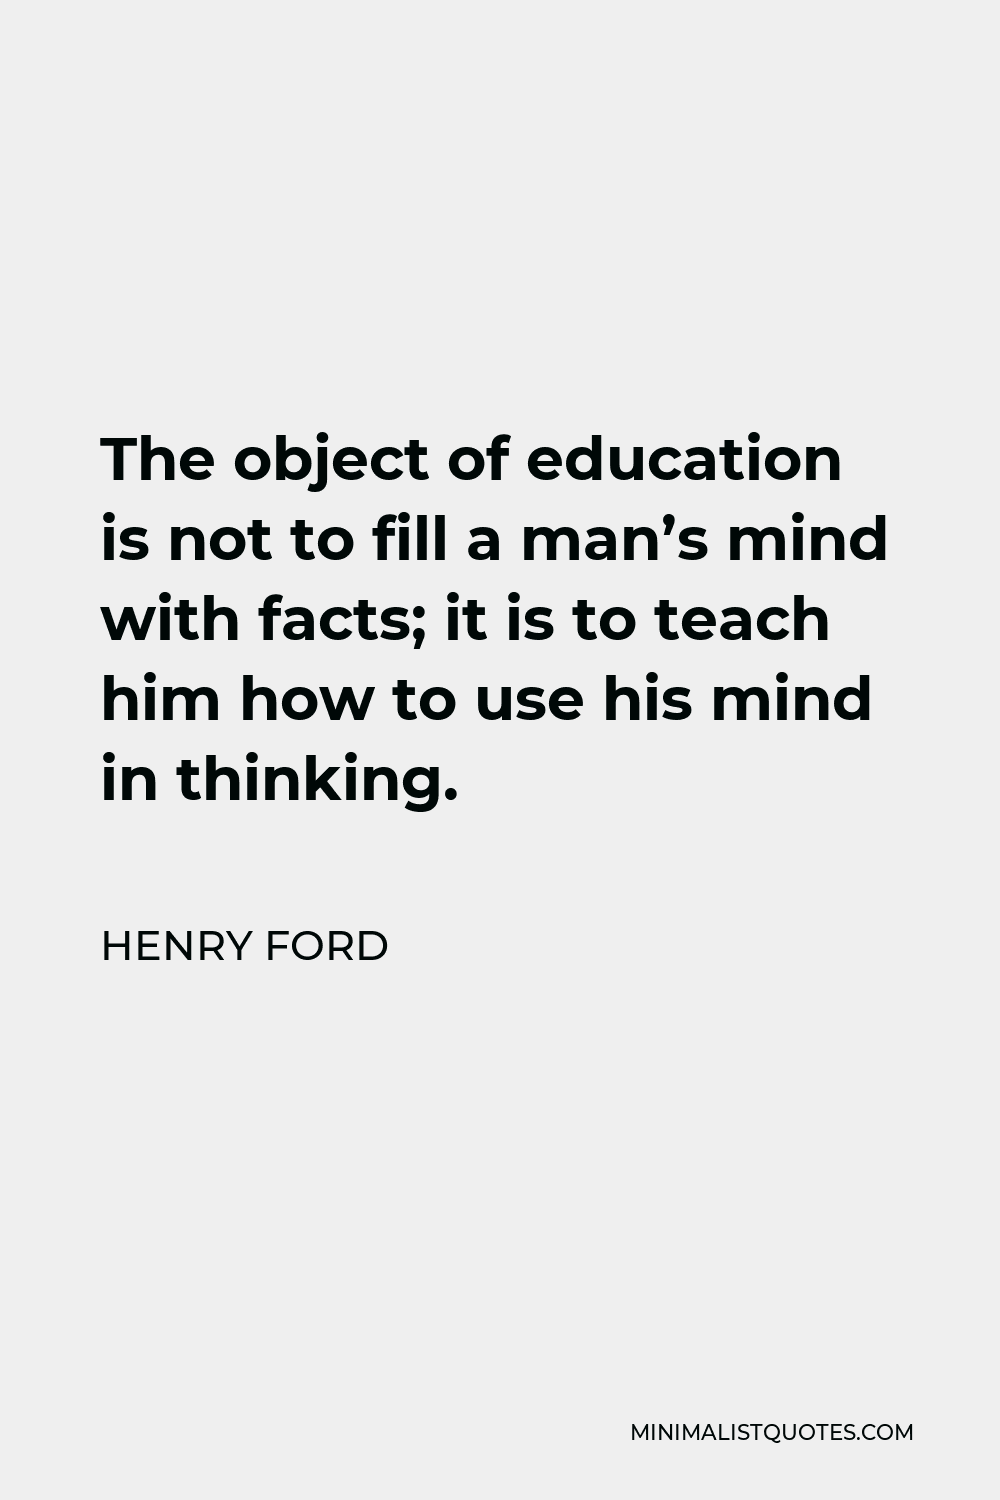 Henry Ford Quote - The object of education is not to fill a man’s mind with facts; it is to teach him how to use his mind in thinking.